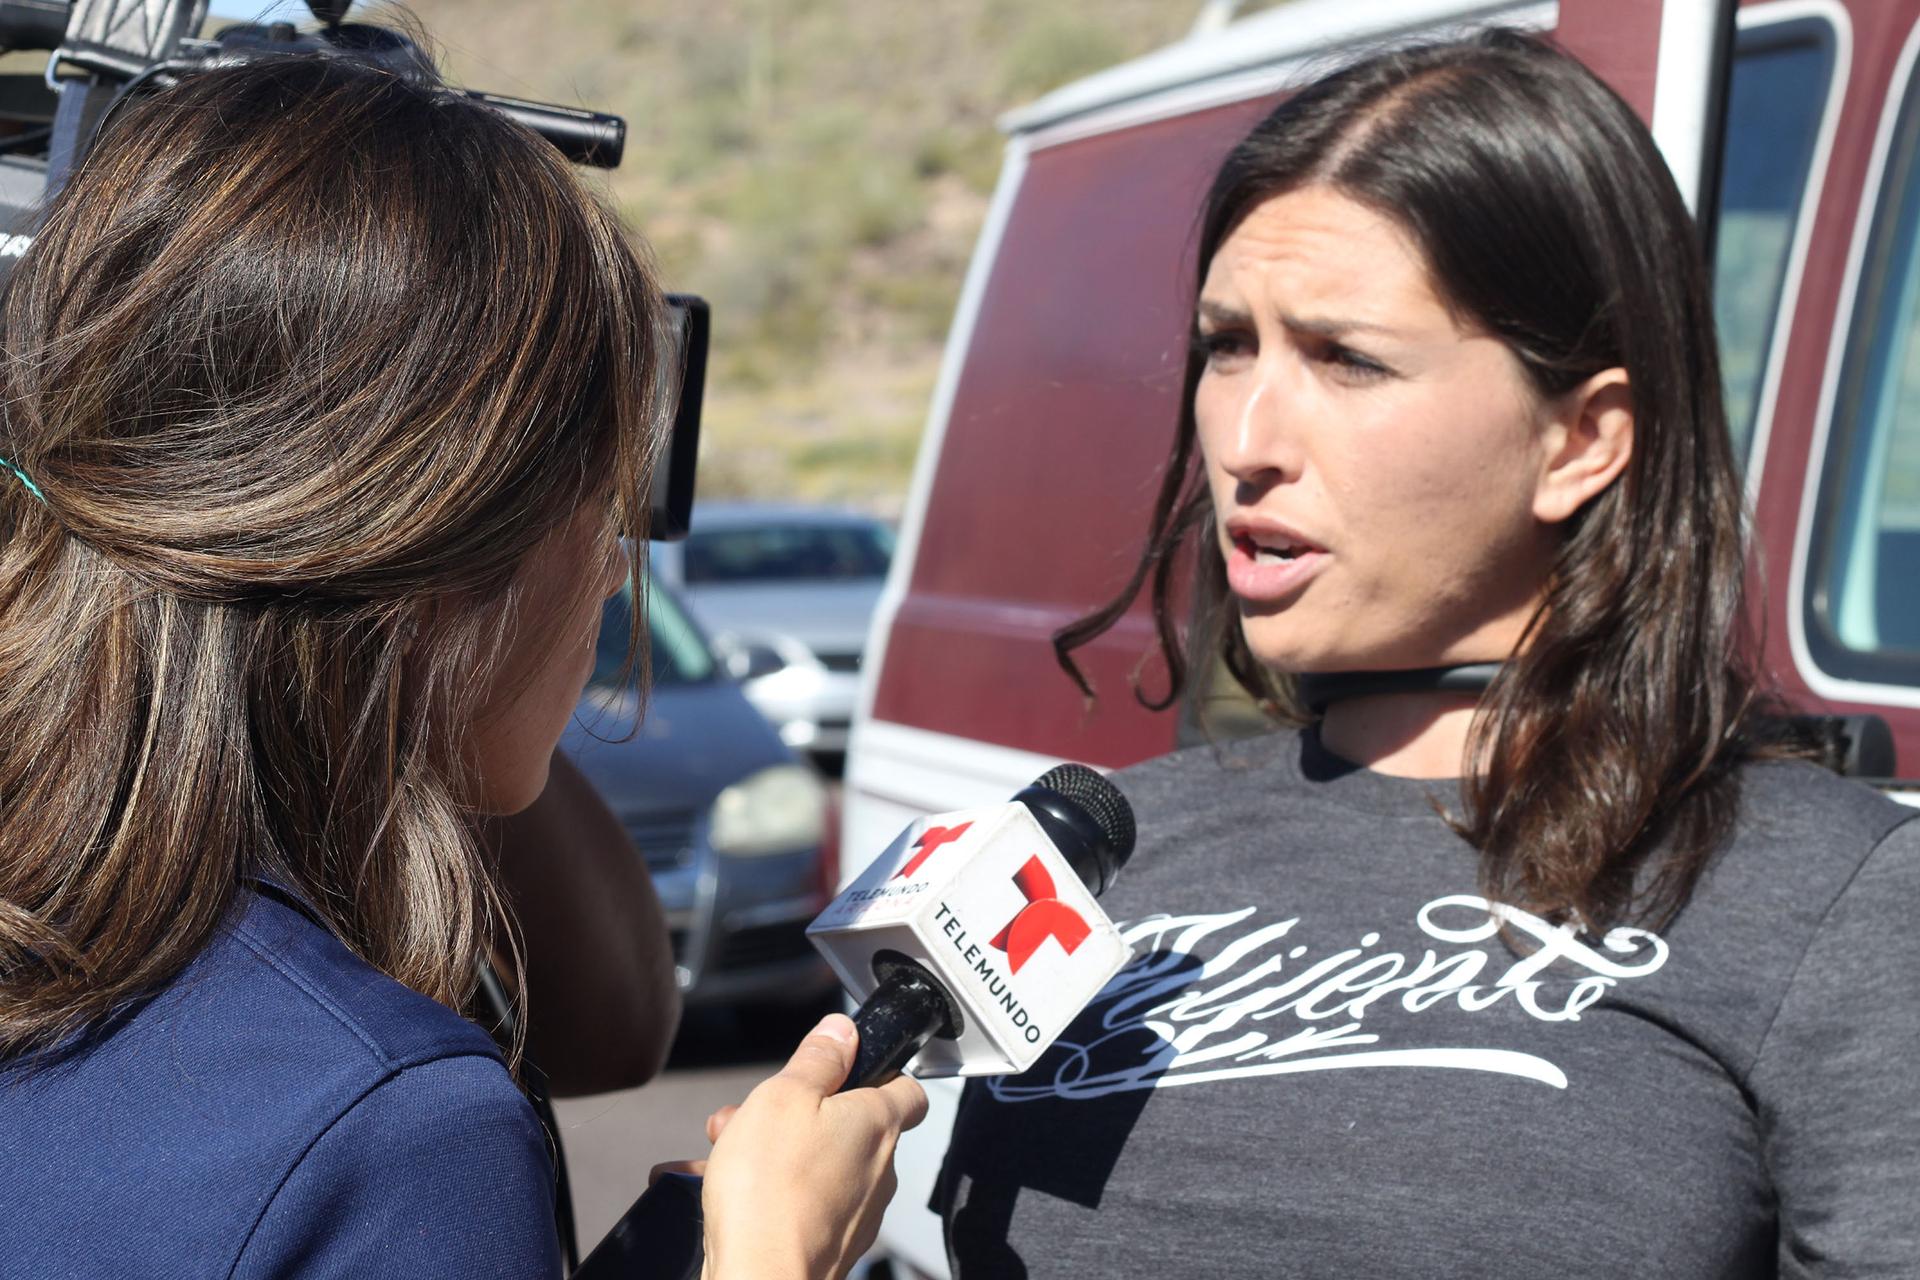 Gonzalez locked to a vehicle with a chain around her neck, being interview by a reporter.